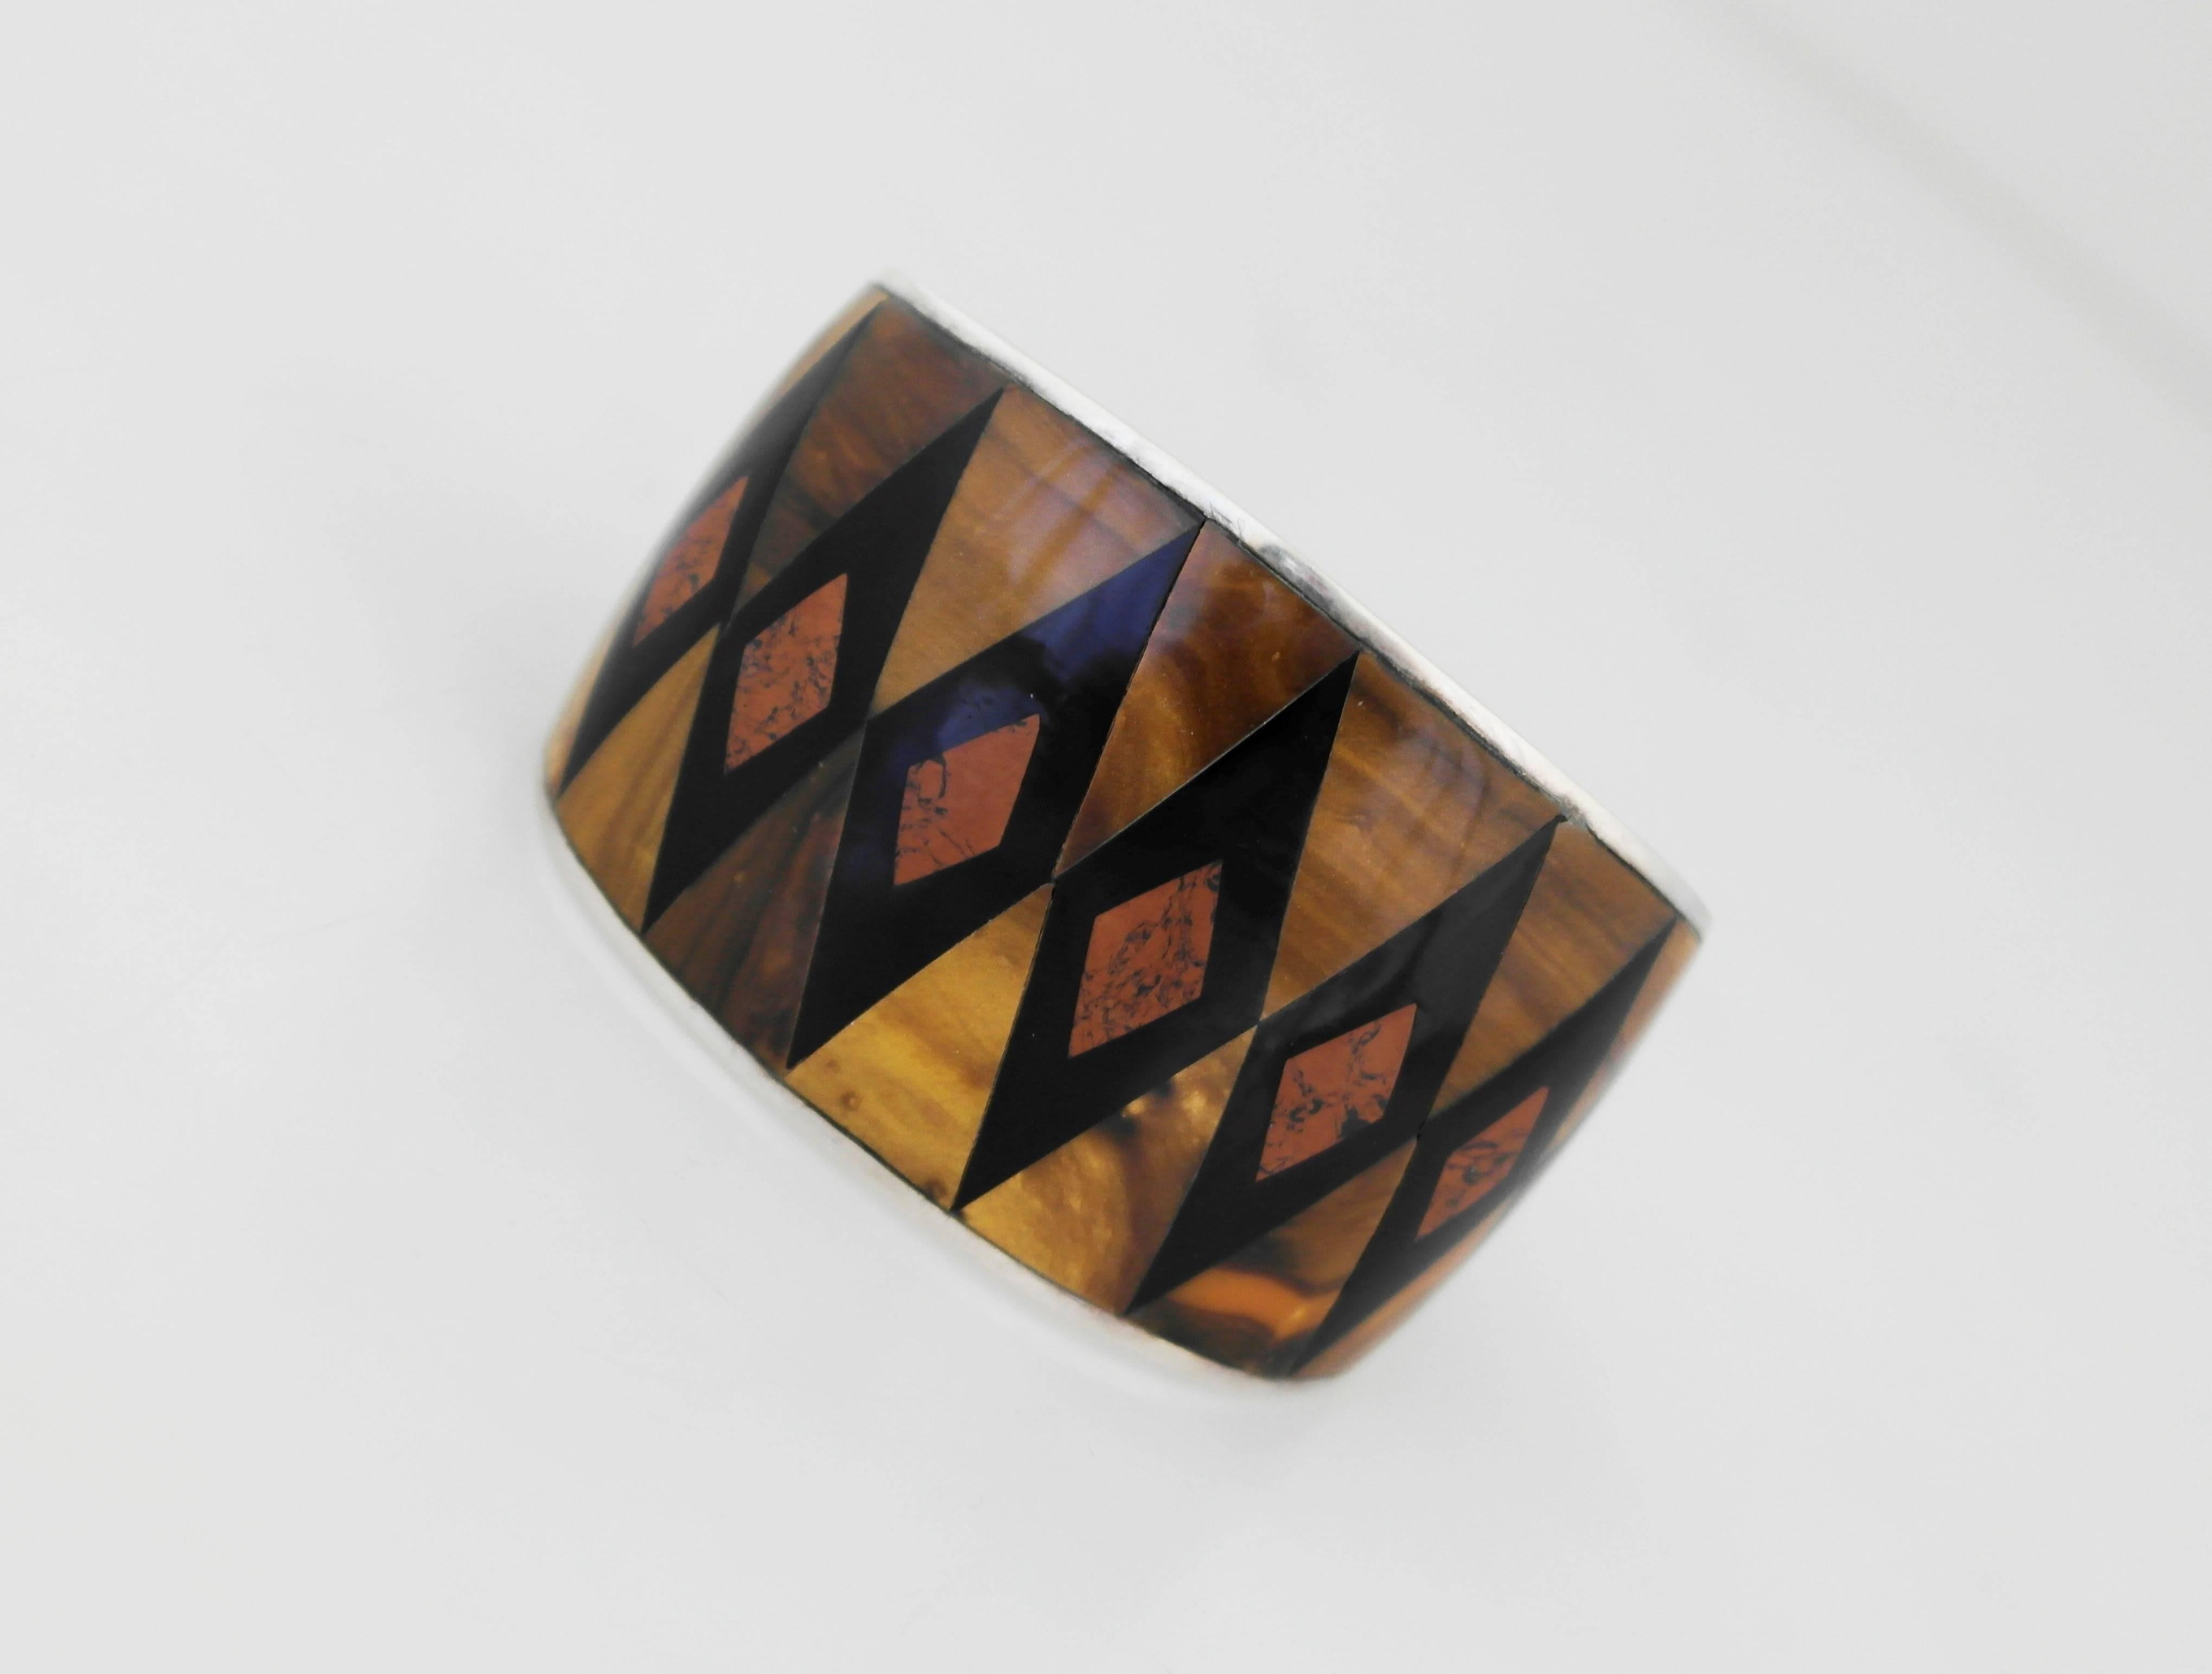 Being offered is a circa 1940 sterling silver bracelet by Bernice Goodspeed of Mexico. Incredible cuff bracelet designed with tiger's eye and onyx inlay. Dimensions: wearable 6 1/2 inches x 1 3/4 inches wide; 1 1/4 inch opening. Marked as